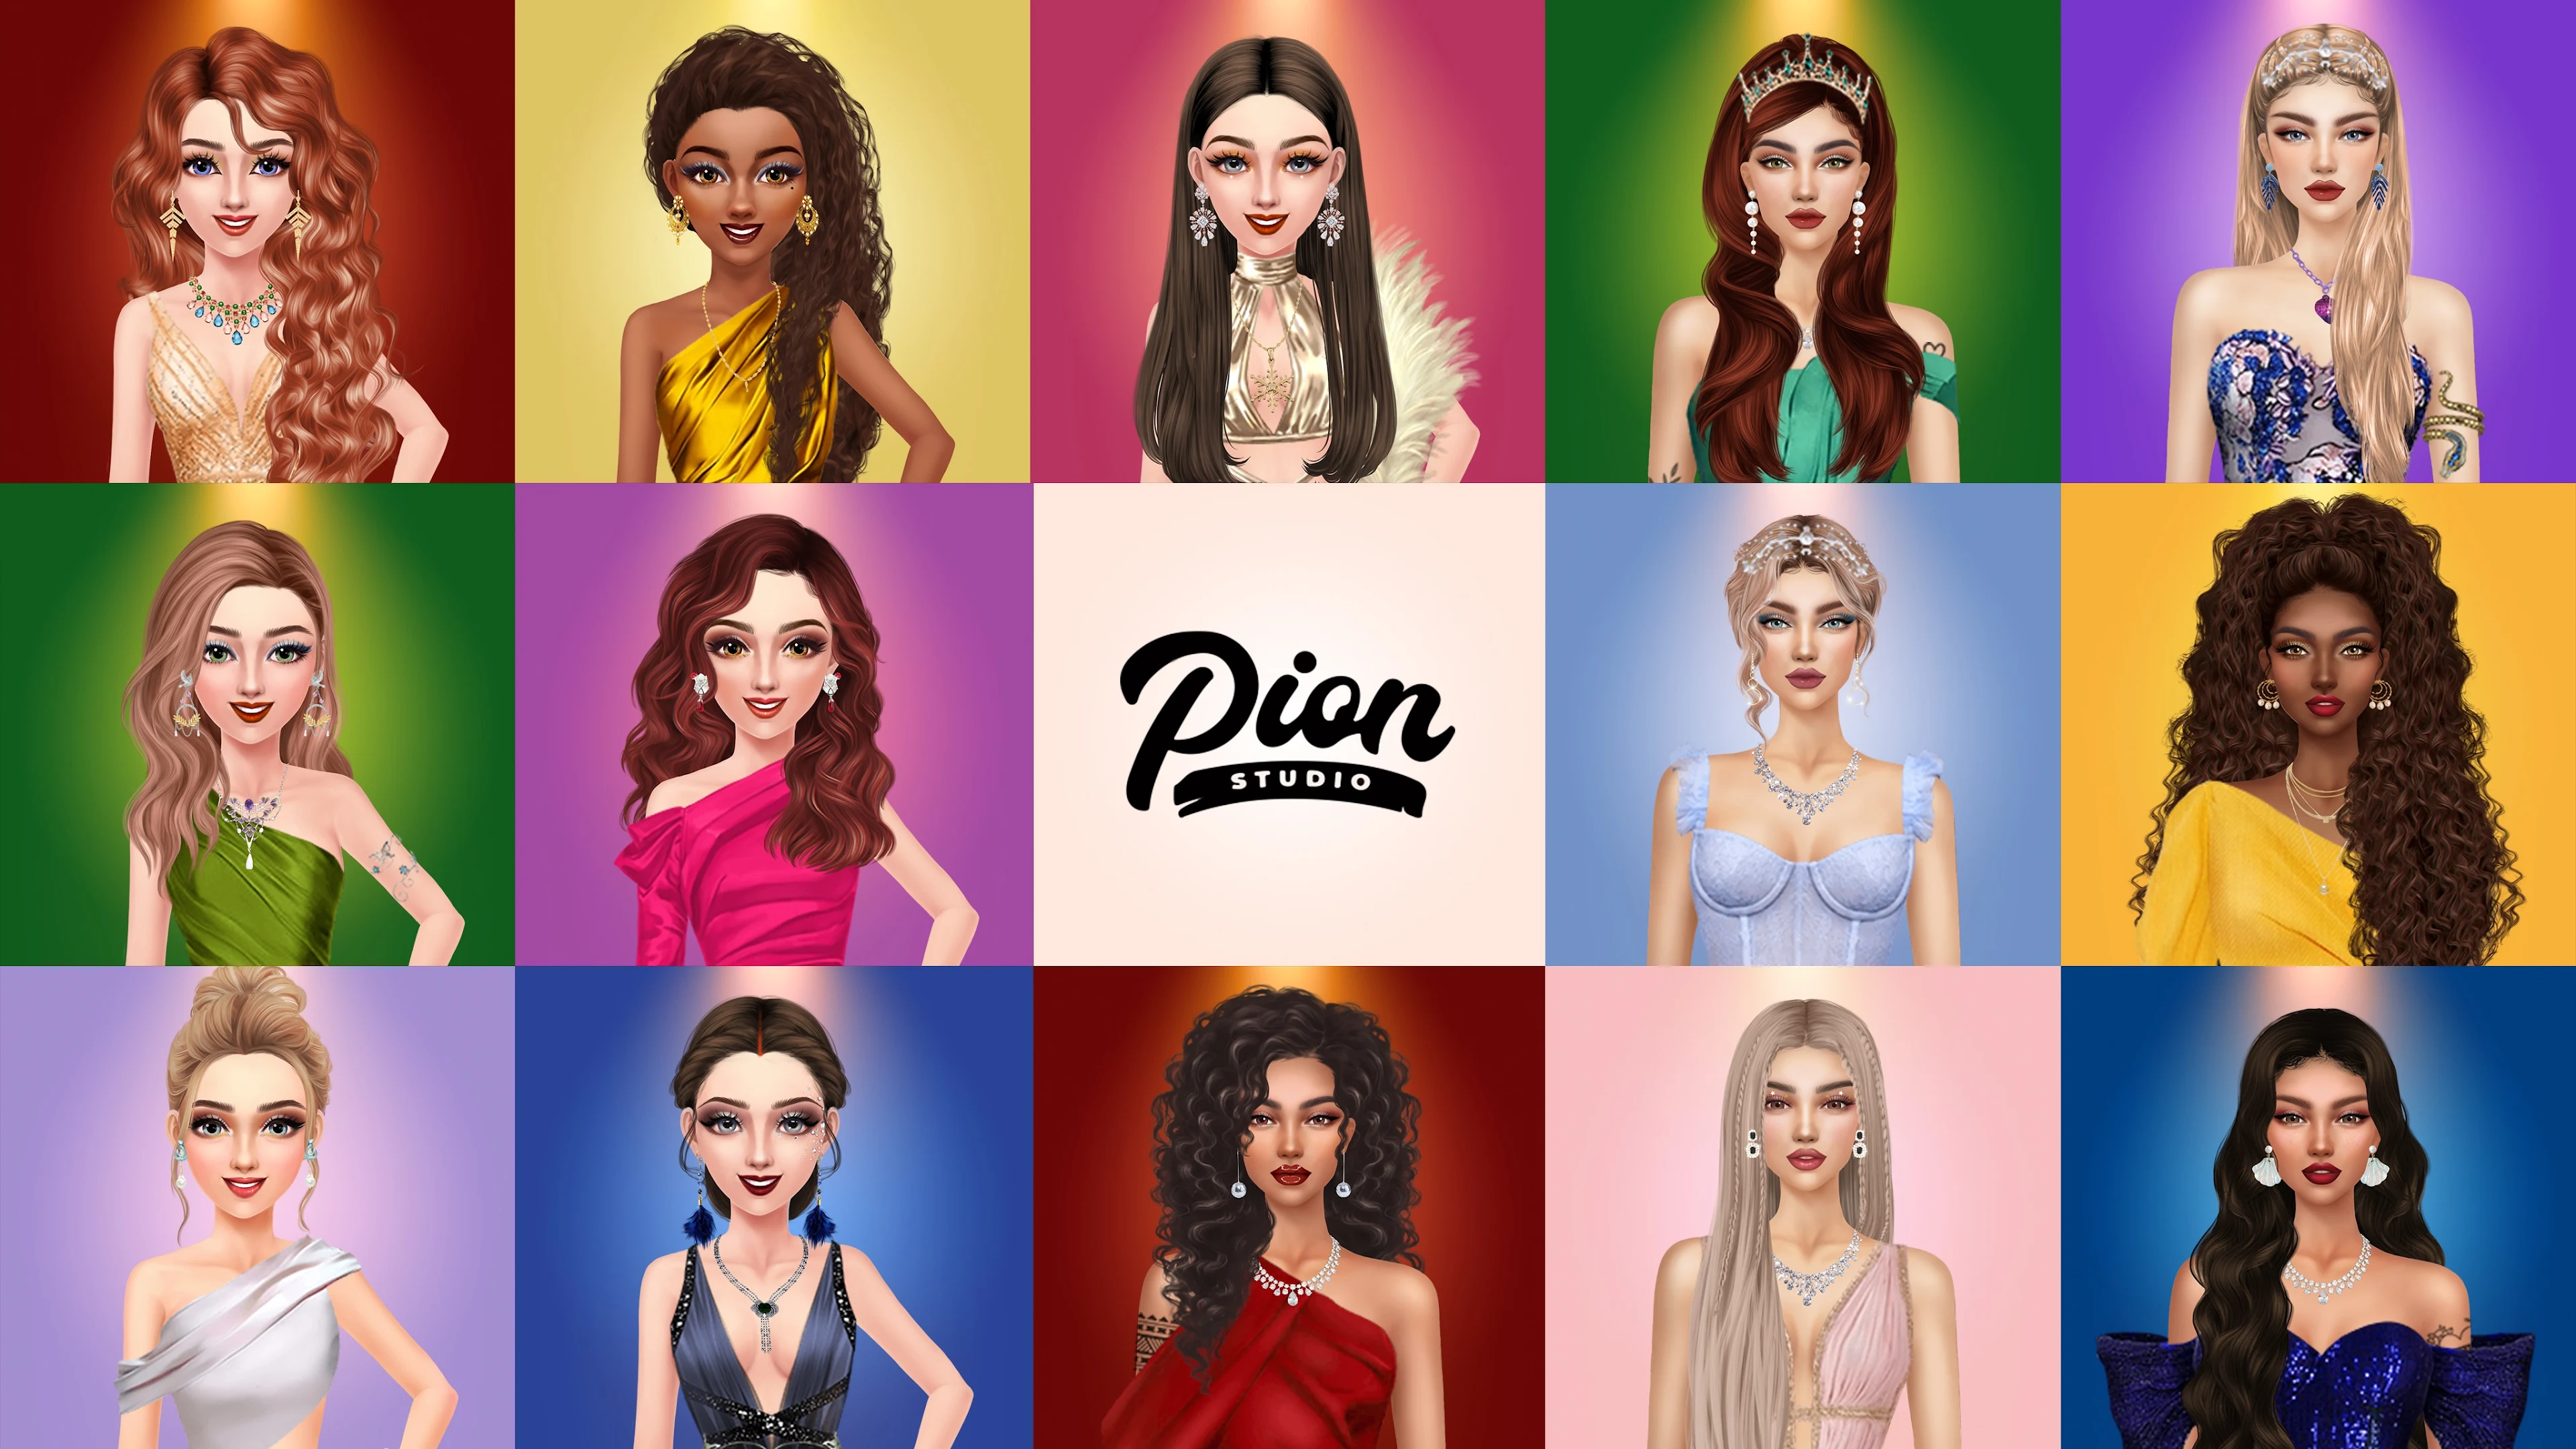 Princess Doll Dress Up Games - Apps on Google Play